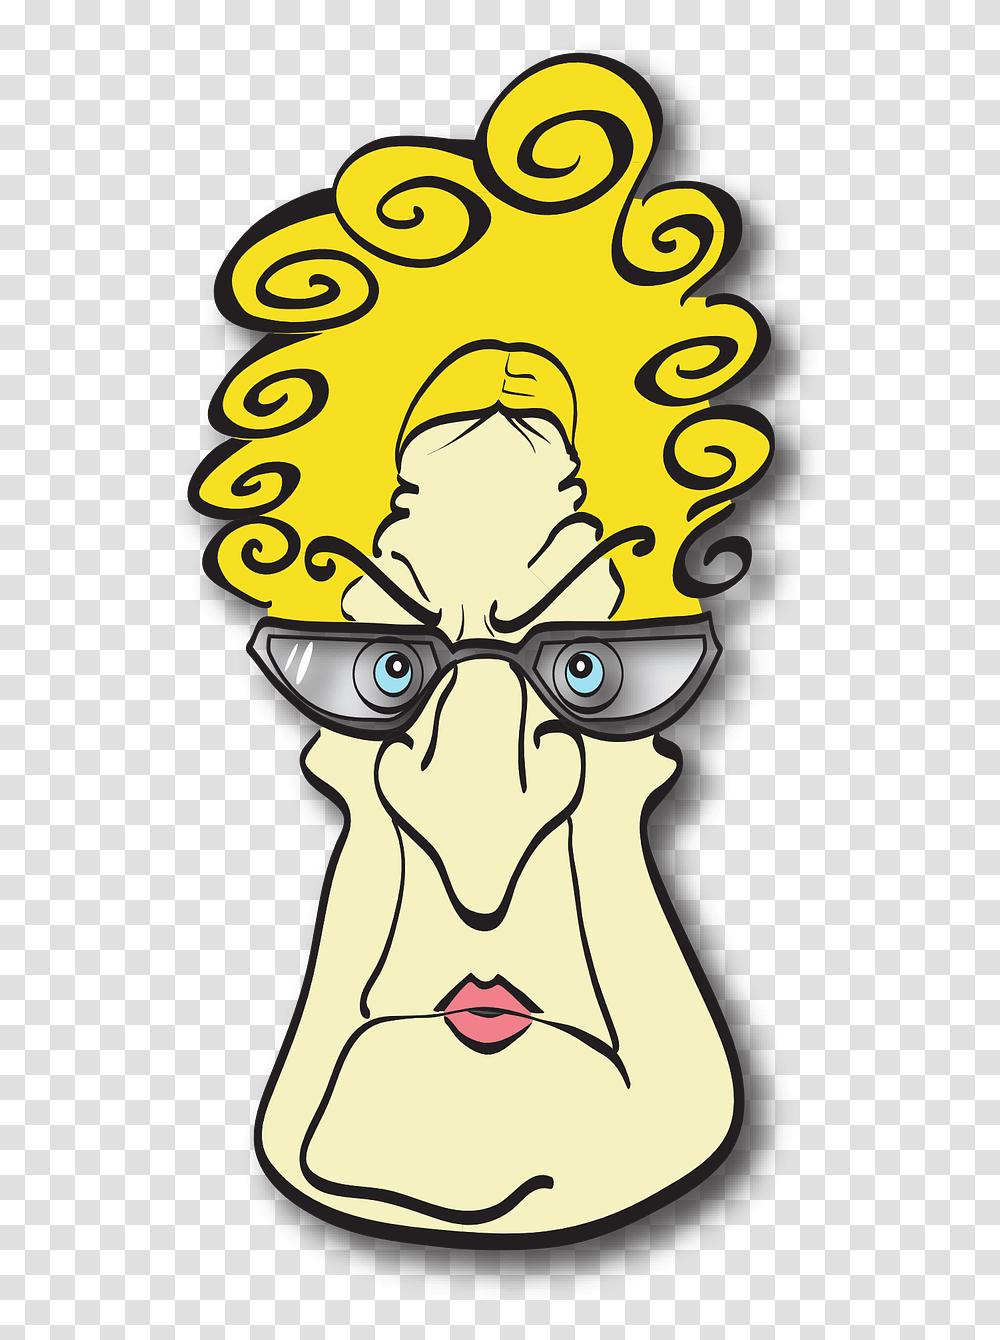 Download Old Lady Woman Angry Cartoon Glasses Glass Cartoon Old Lady With Glasses, Head, Teeth, Mouth, Face Transparent Png